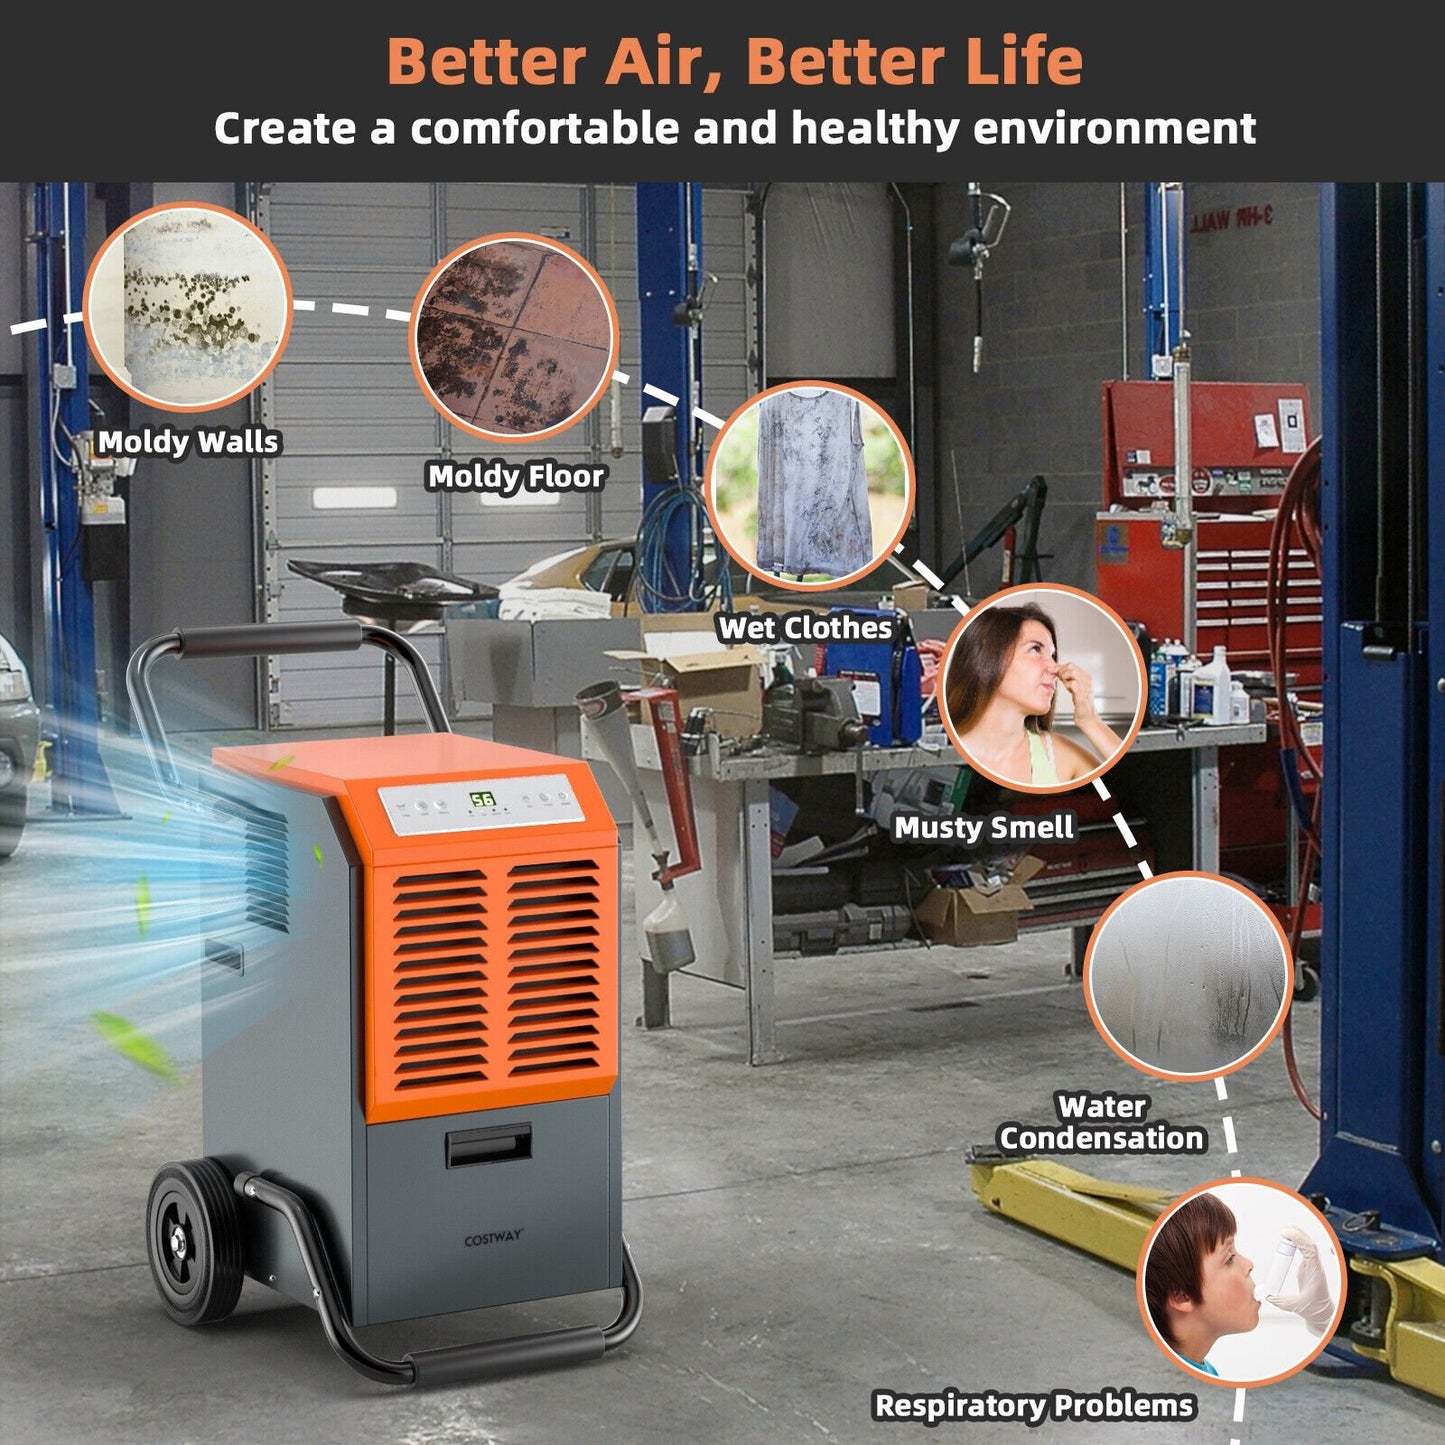 Portable Commercial Dehumidifier with Water Tank and Drainage Pipe, Gray at Gallery Canada